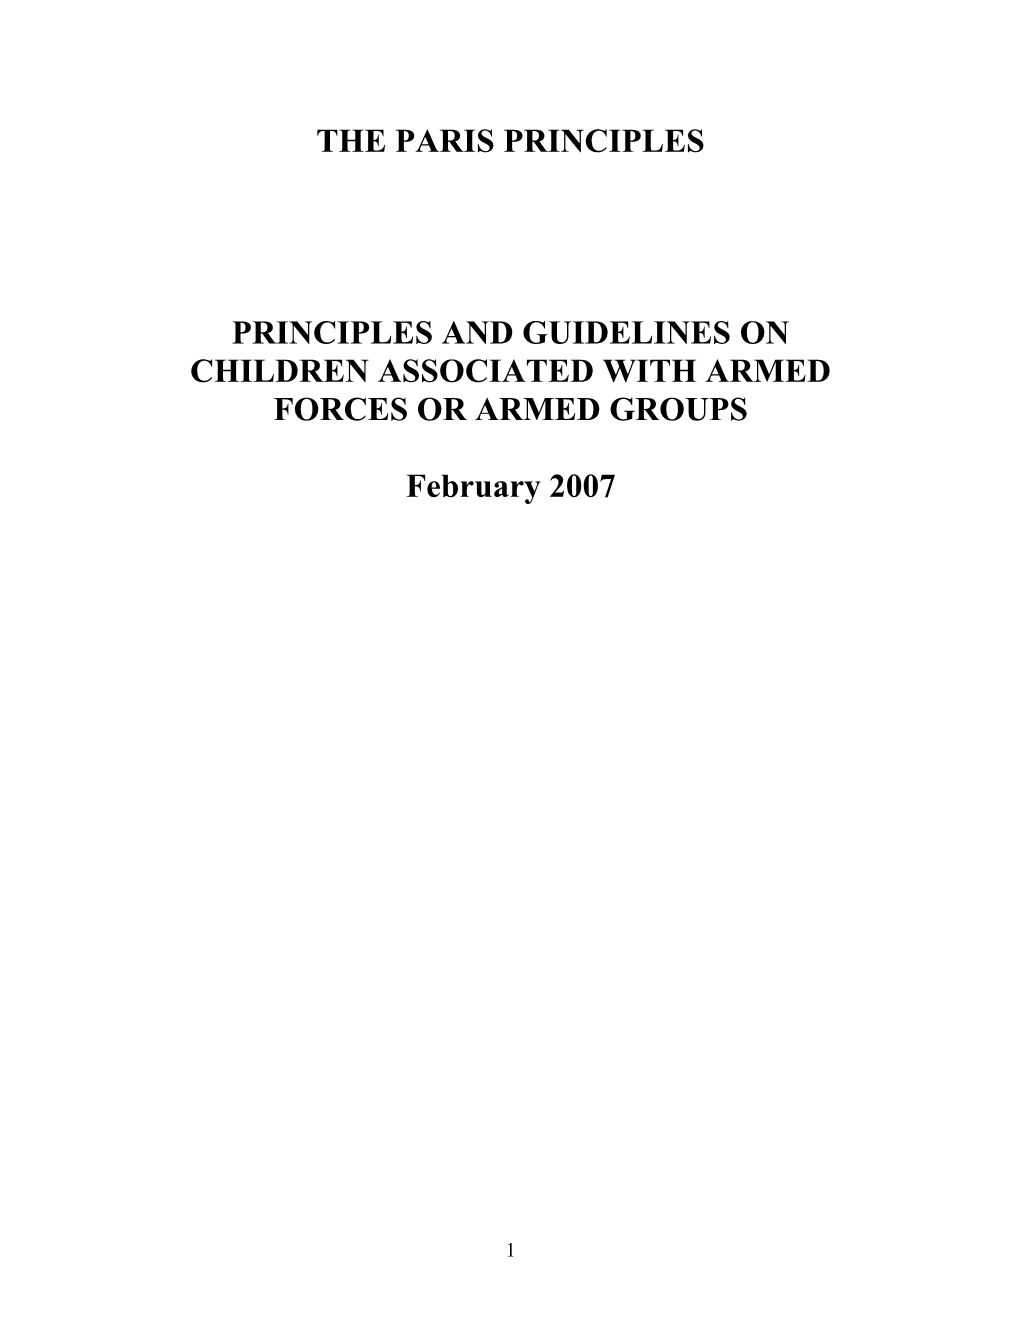 Principles and Guidelines on Children Associated with Armed Forces Or Armed Groups